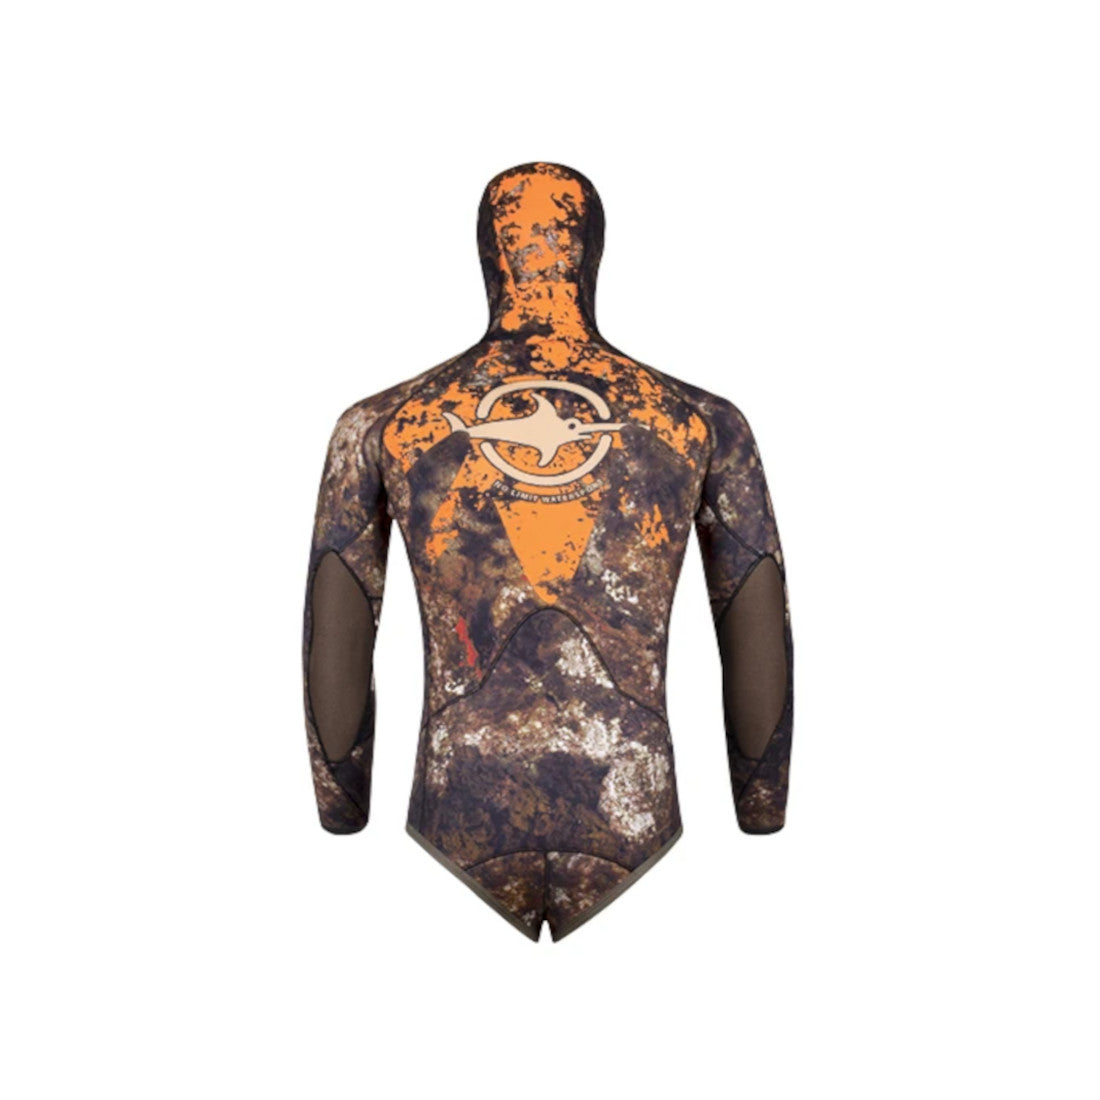 OMER 5mm Holostone Camouflage Freediving & Spearfishing Wetsuits - Top –  House of Scuba